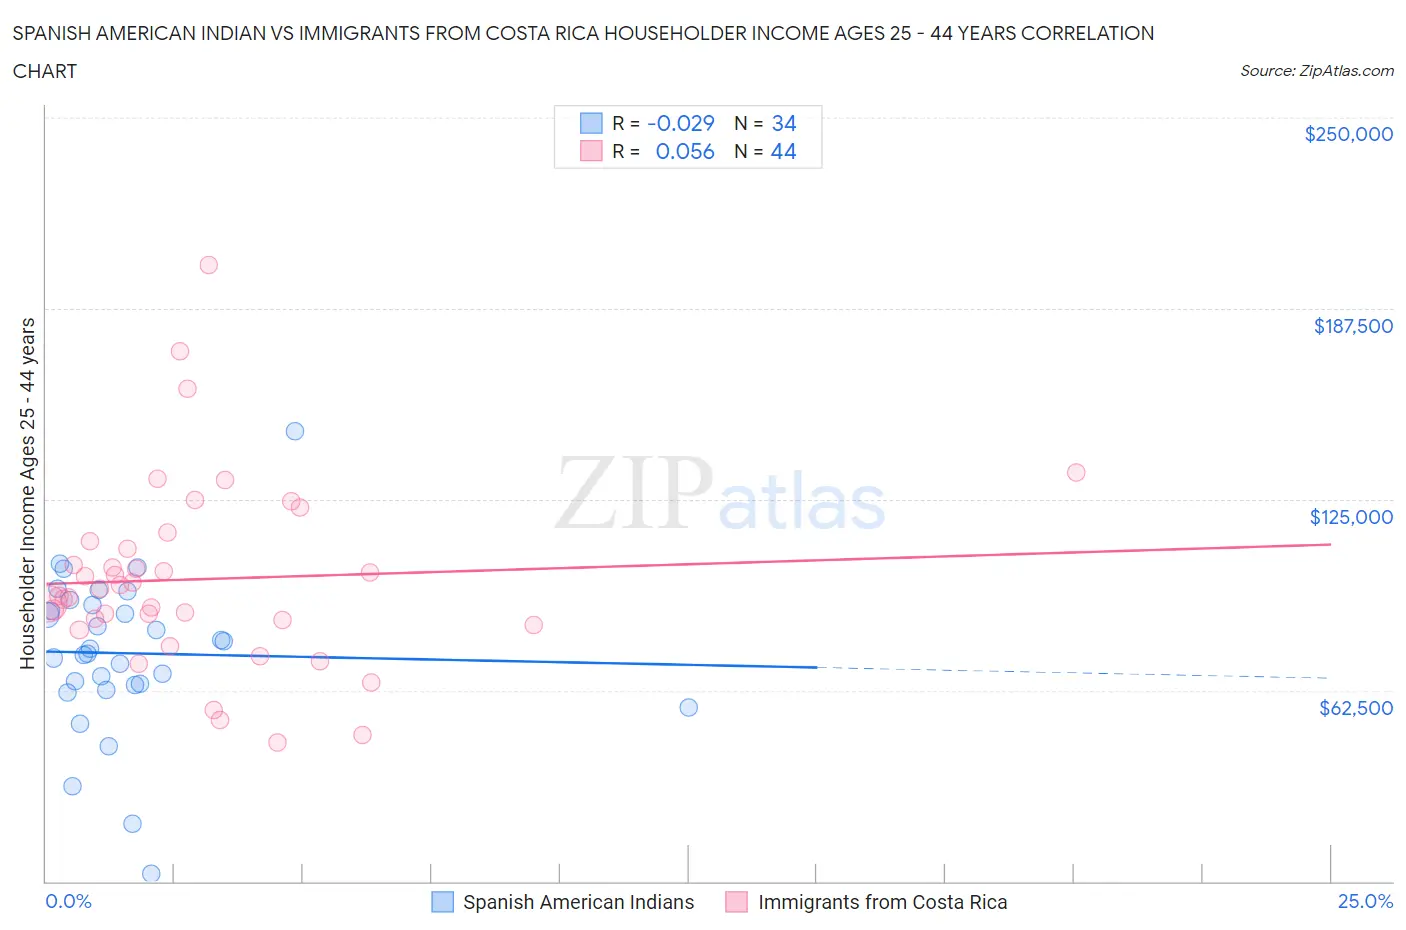 Spanish American Indian vs Immigrants from Costa Rica Householder Income Ages 25 - 44 years